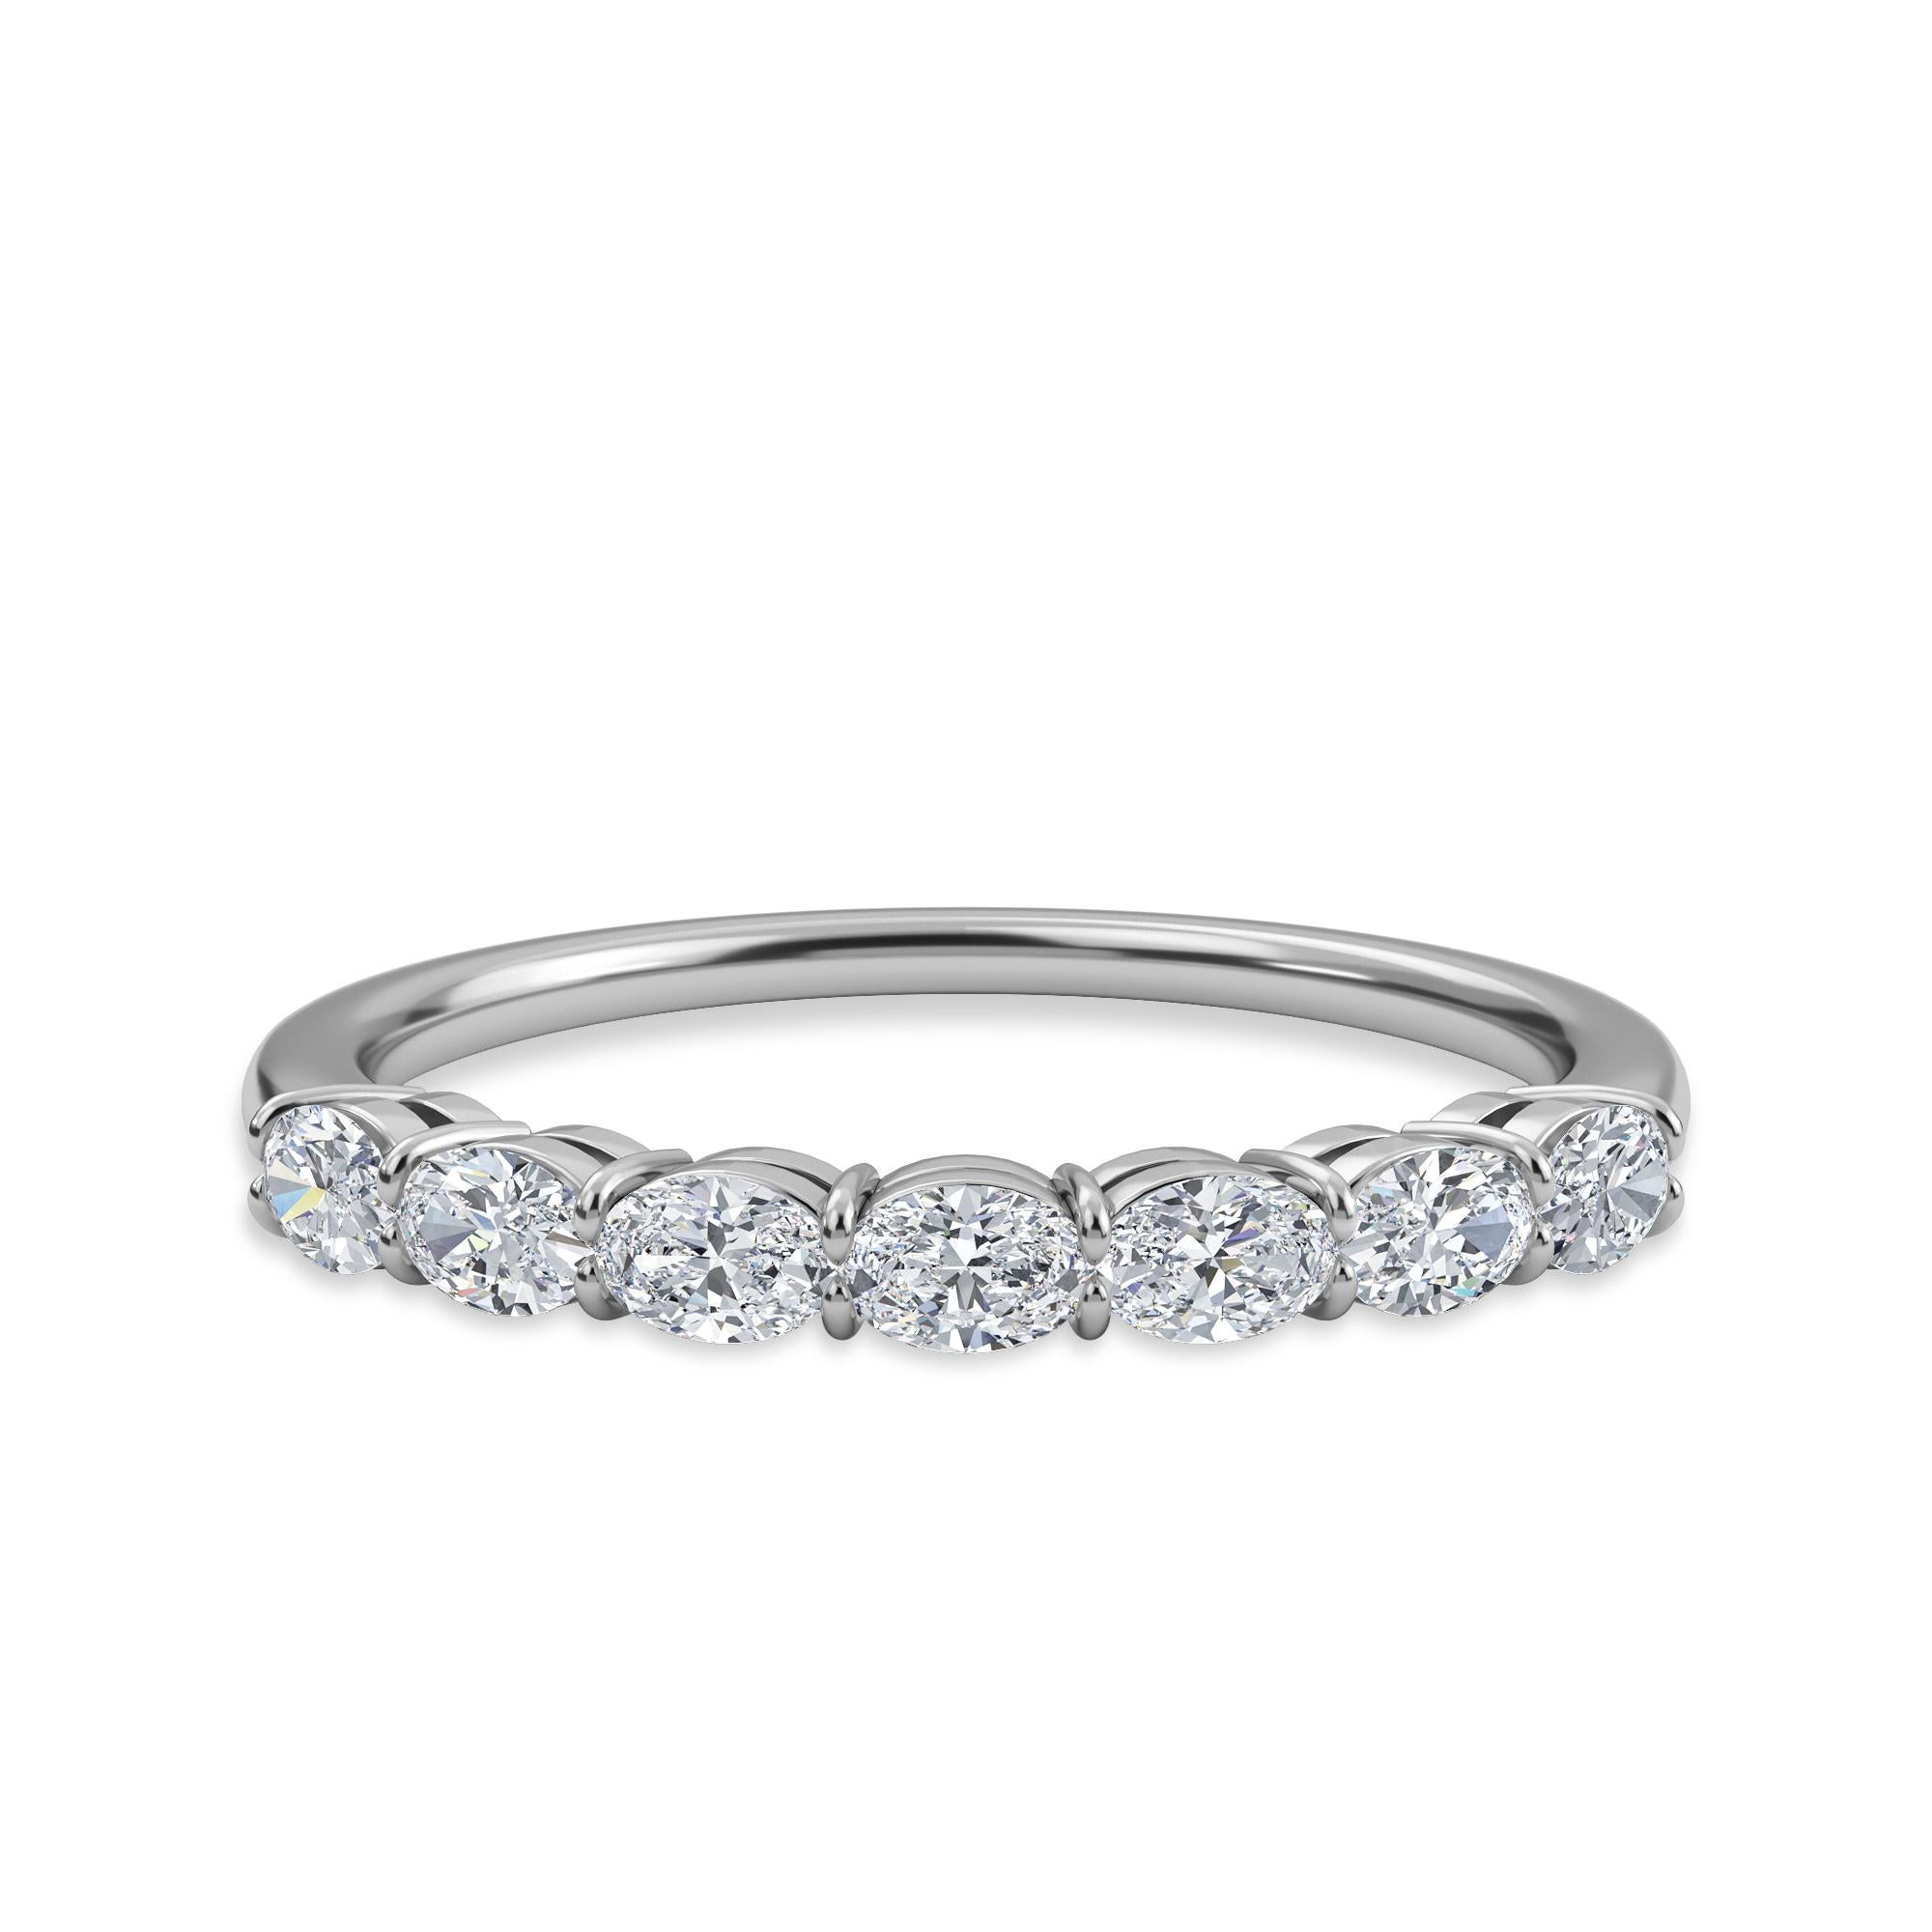 This Oval Horizontal Eternity Band features 7 Oval Diamonds, Set Horizontal, with a total weight of 0.60. They stones are F Color, VS-SI Clarity, and are set in a Shared Prong, Platinum setting. 

